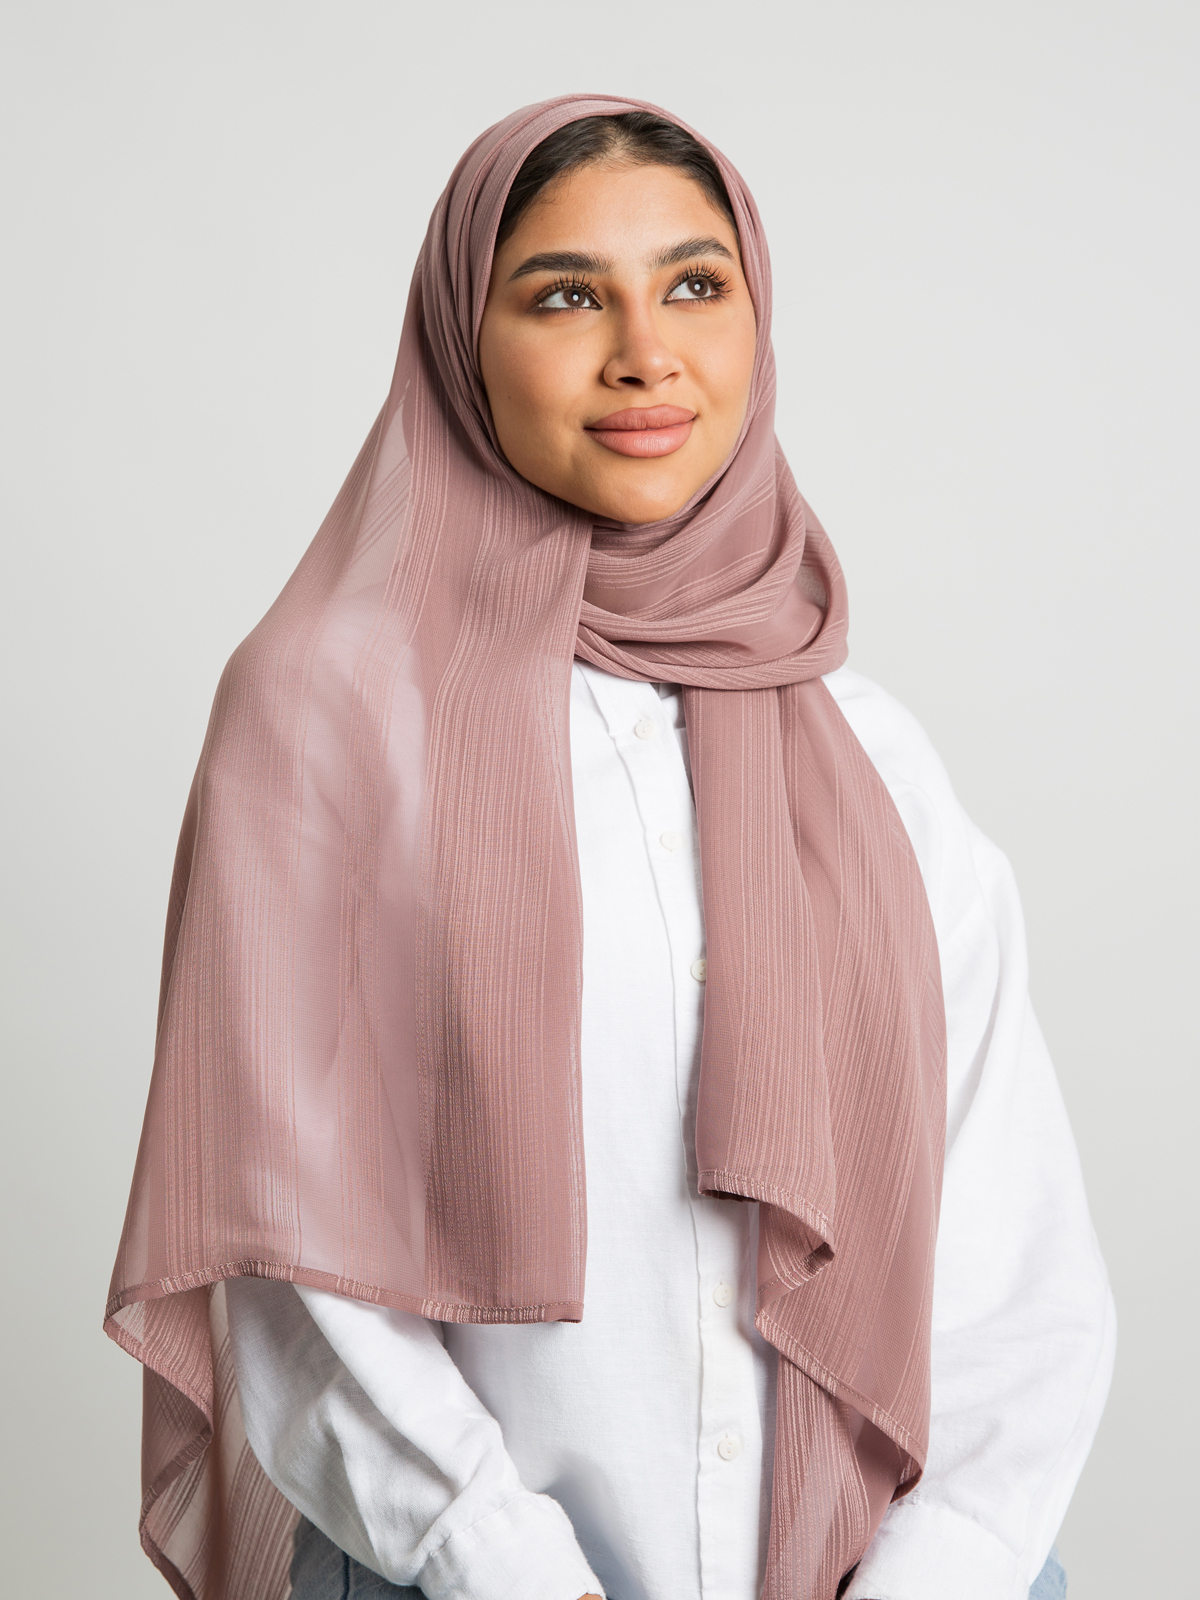 Dusty rose plain bundled stripes soft chiffon laser tarha by kaafmeem hijab for daily wear available in multiple colors